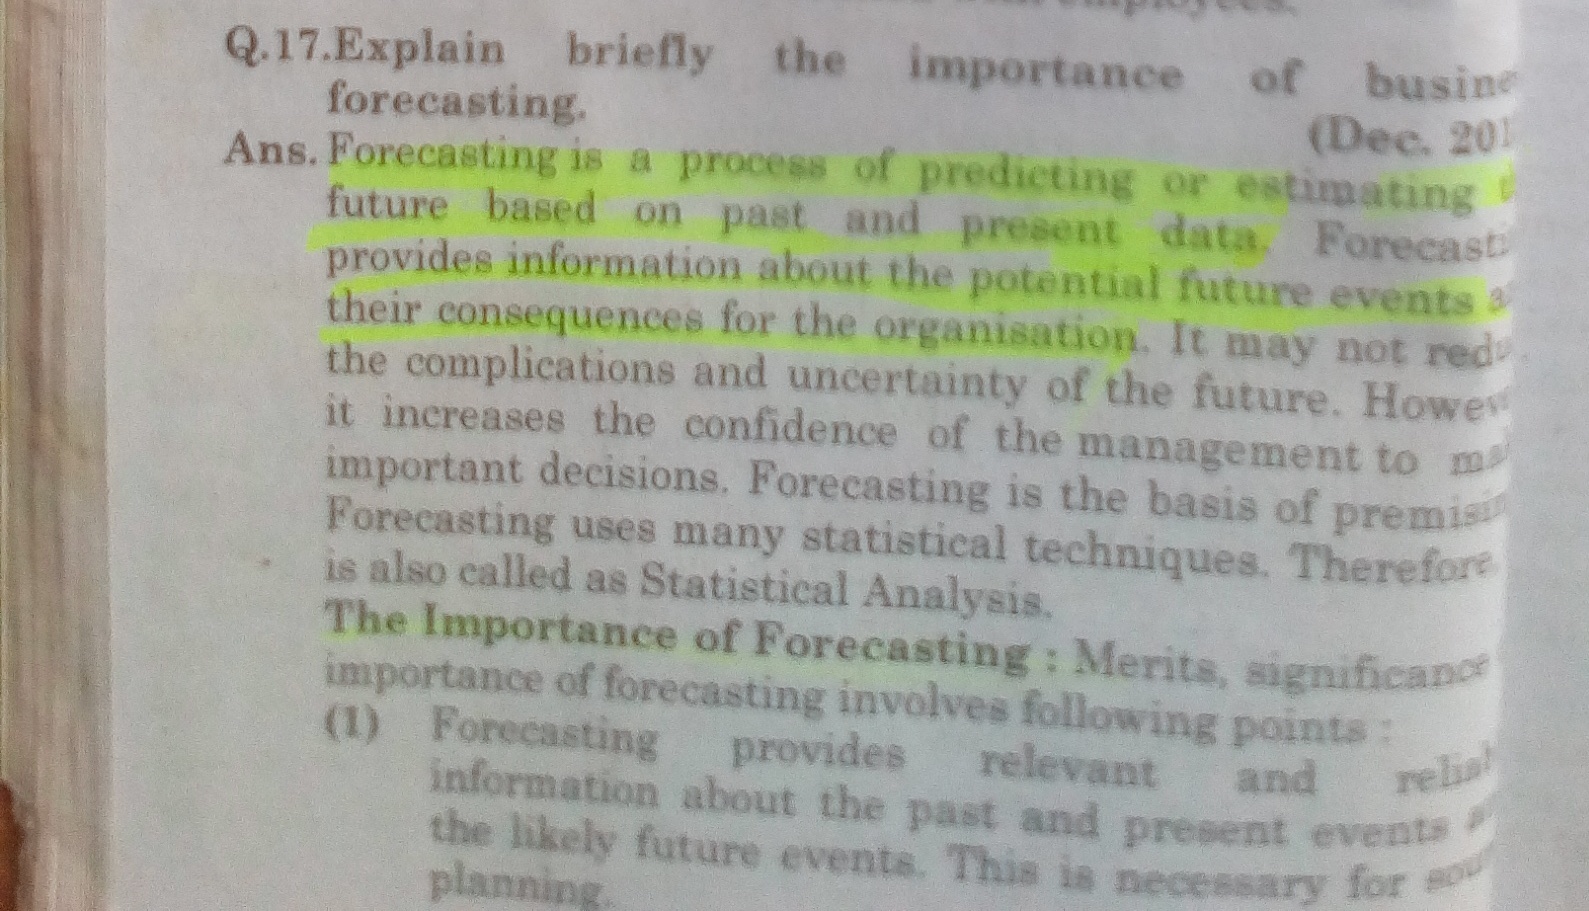 Explain Business Forecasting And also Explain Deterministic Techniques Of forecasting.-IMG_20191007_080158 - Copy.jpg